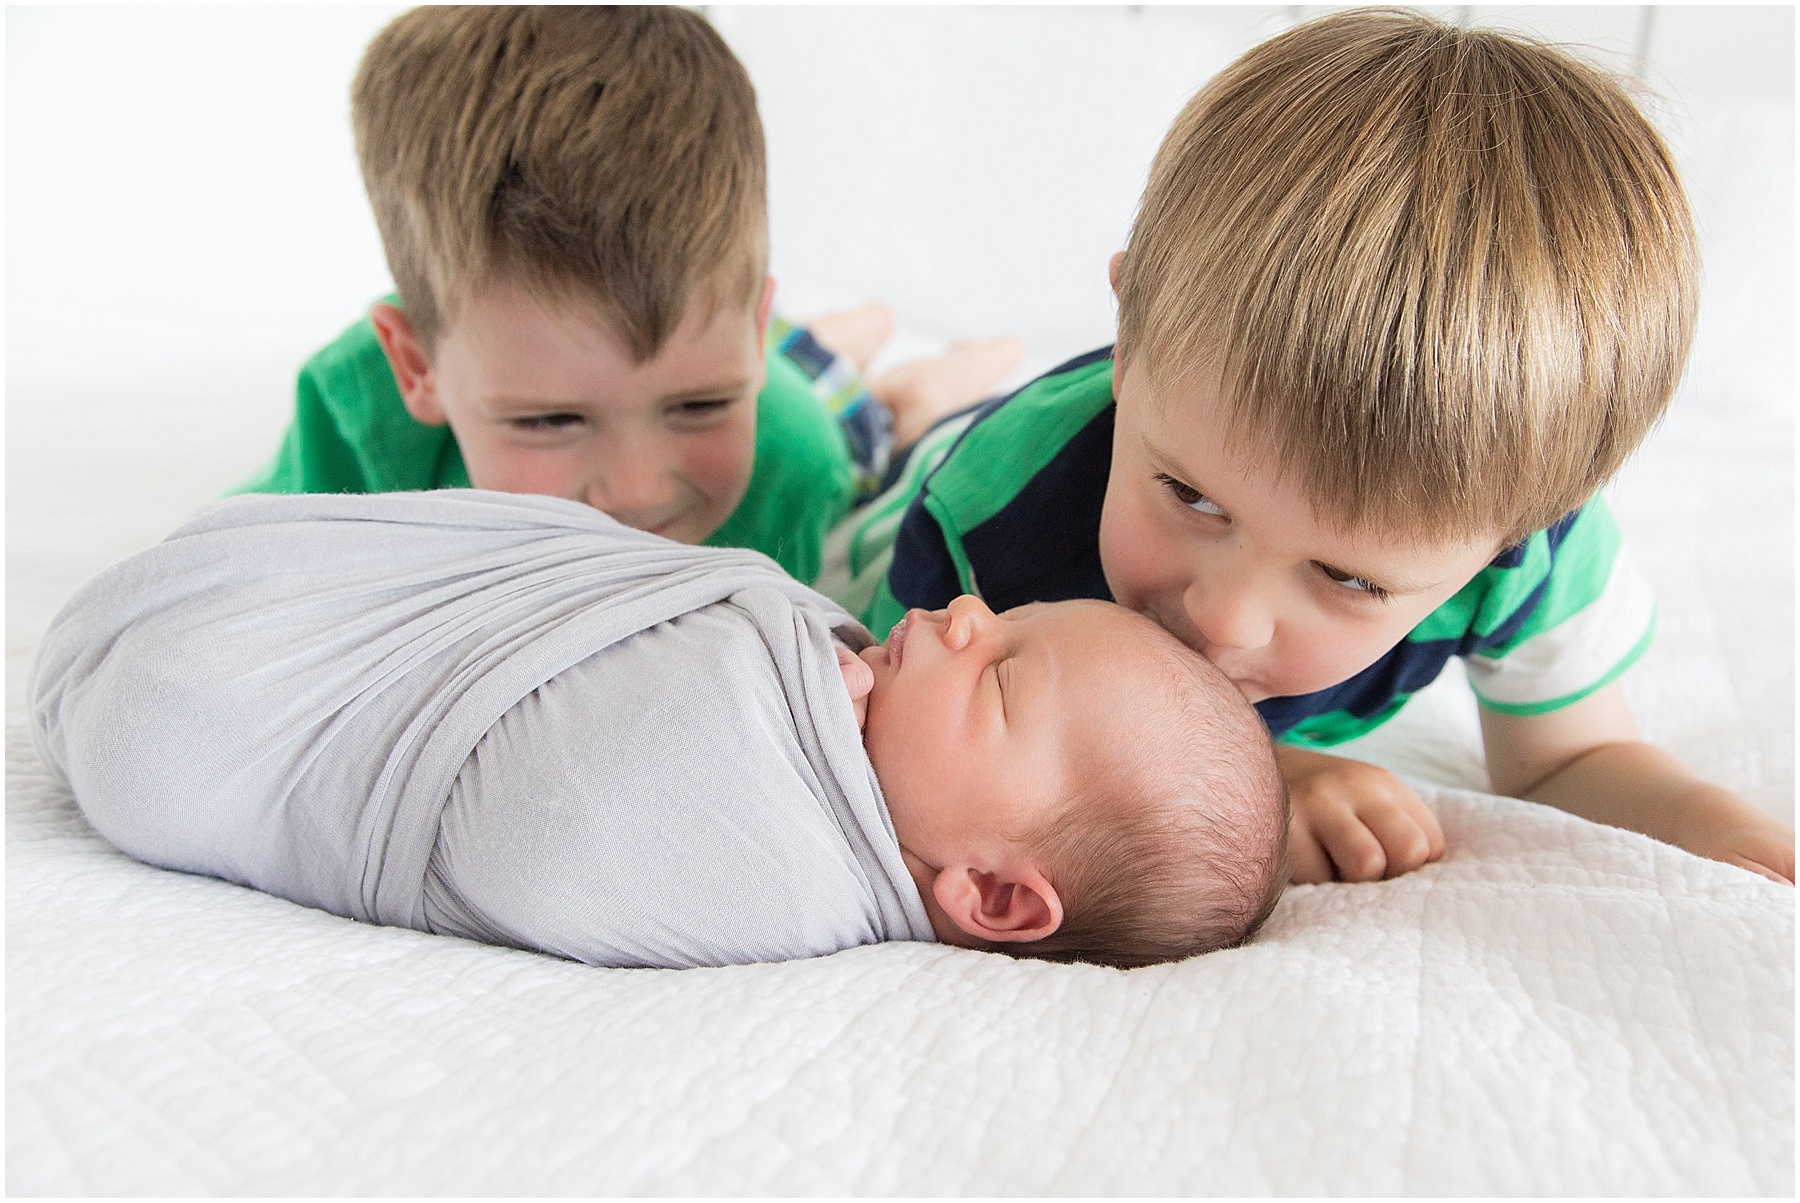 Big brothers kissing baby brother on forehead, Indianapolis Children Photography, Raindancer Studios